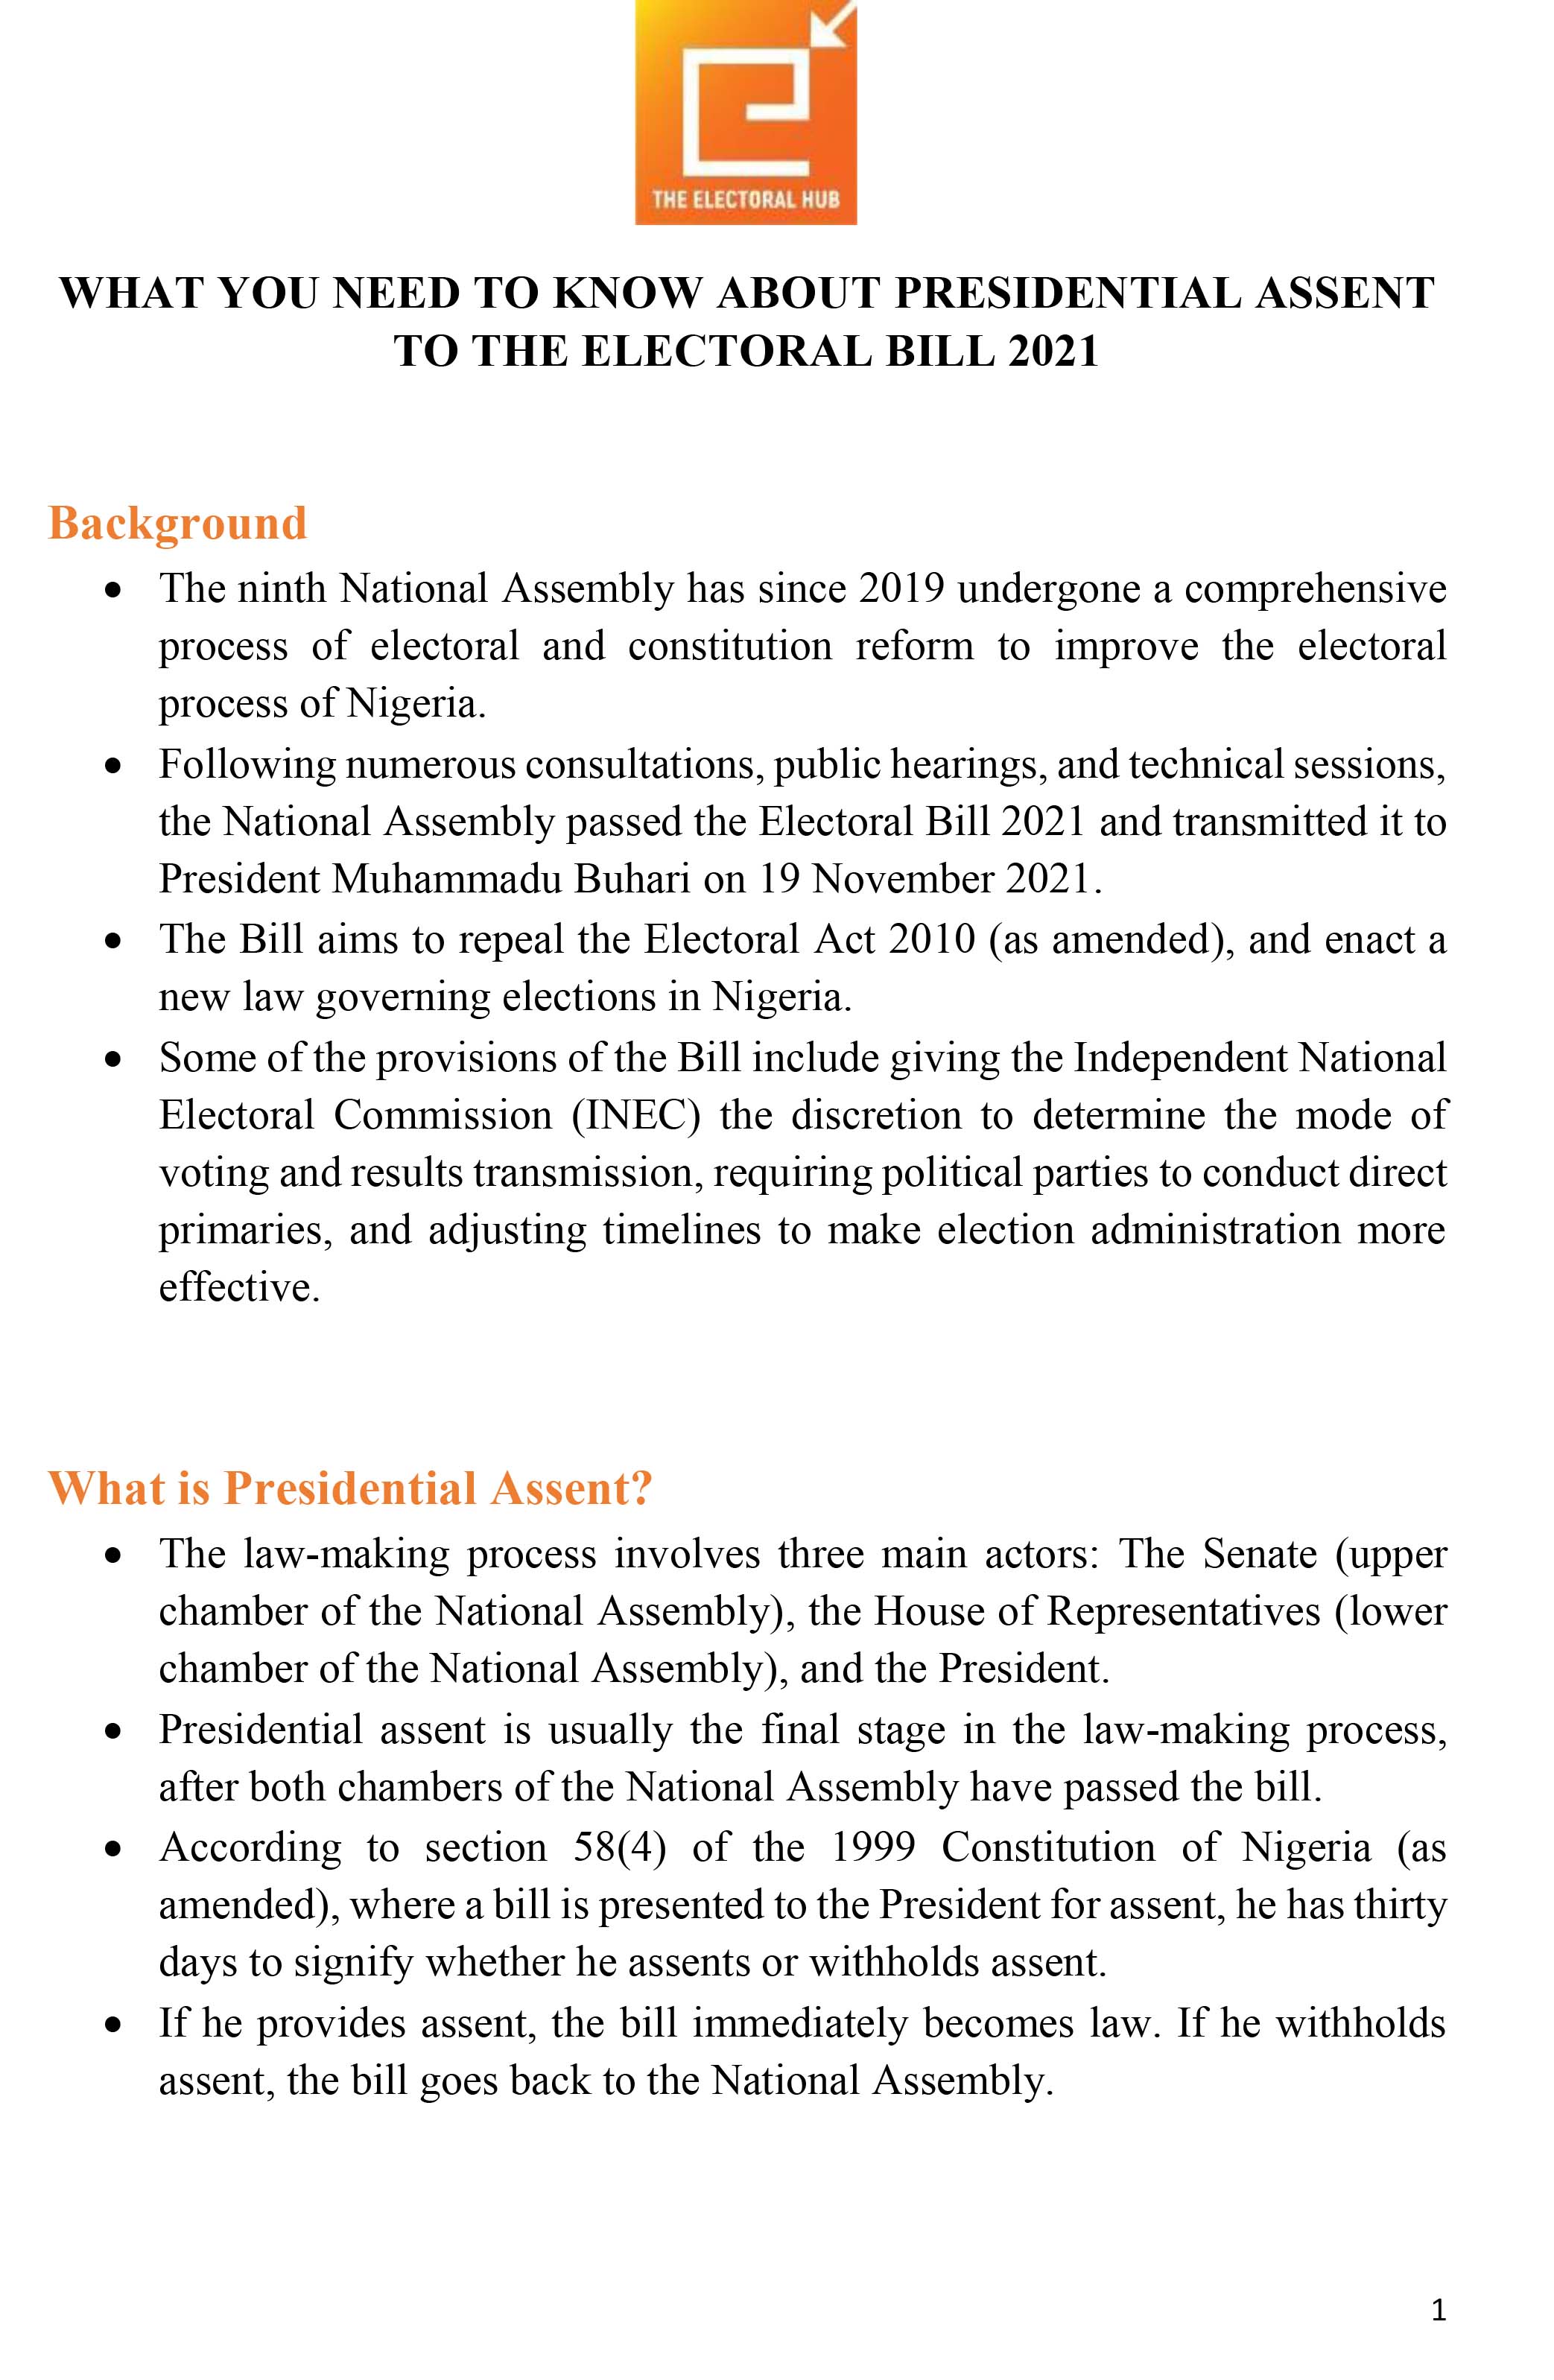 Presidential Assent to the Electoral Bill 2021